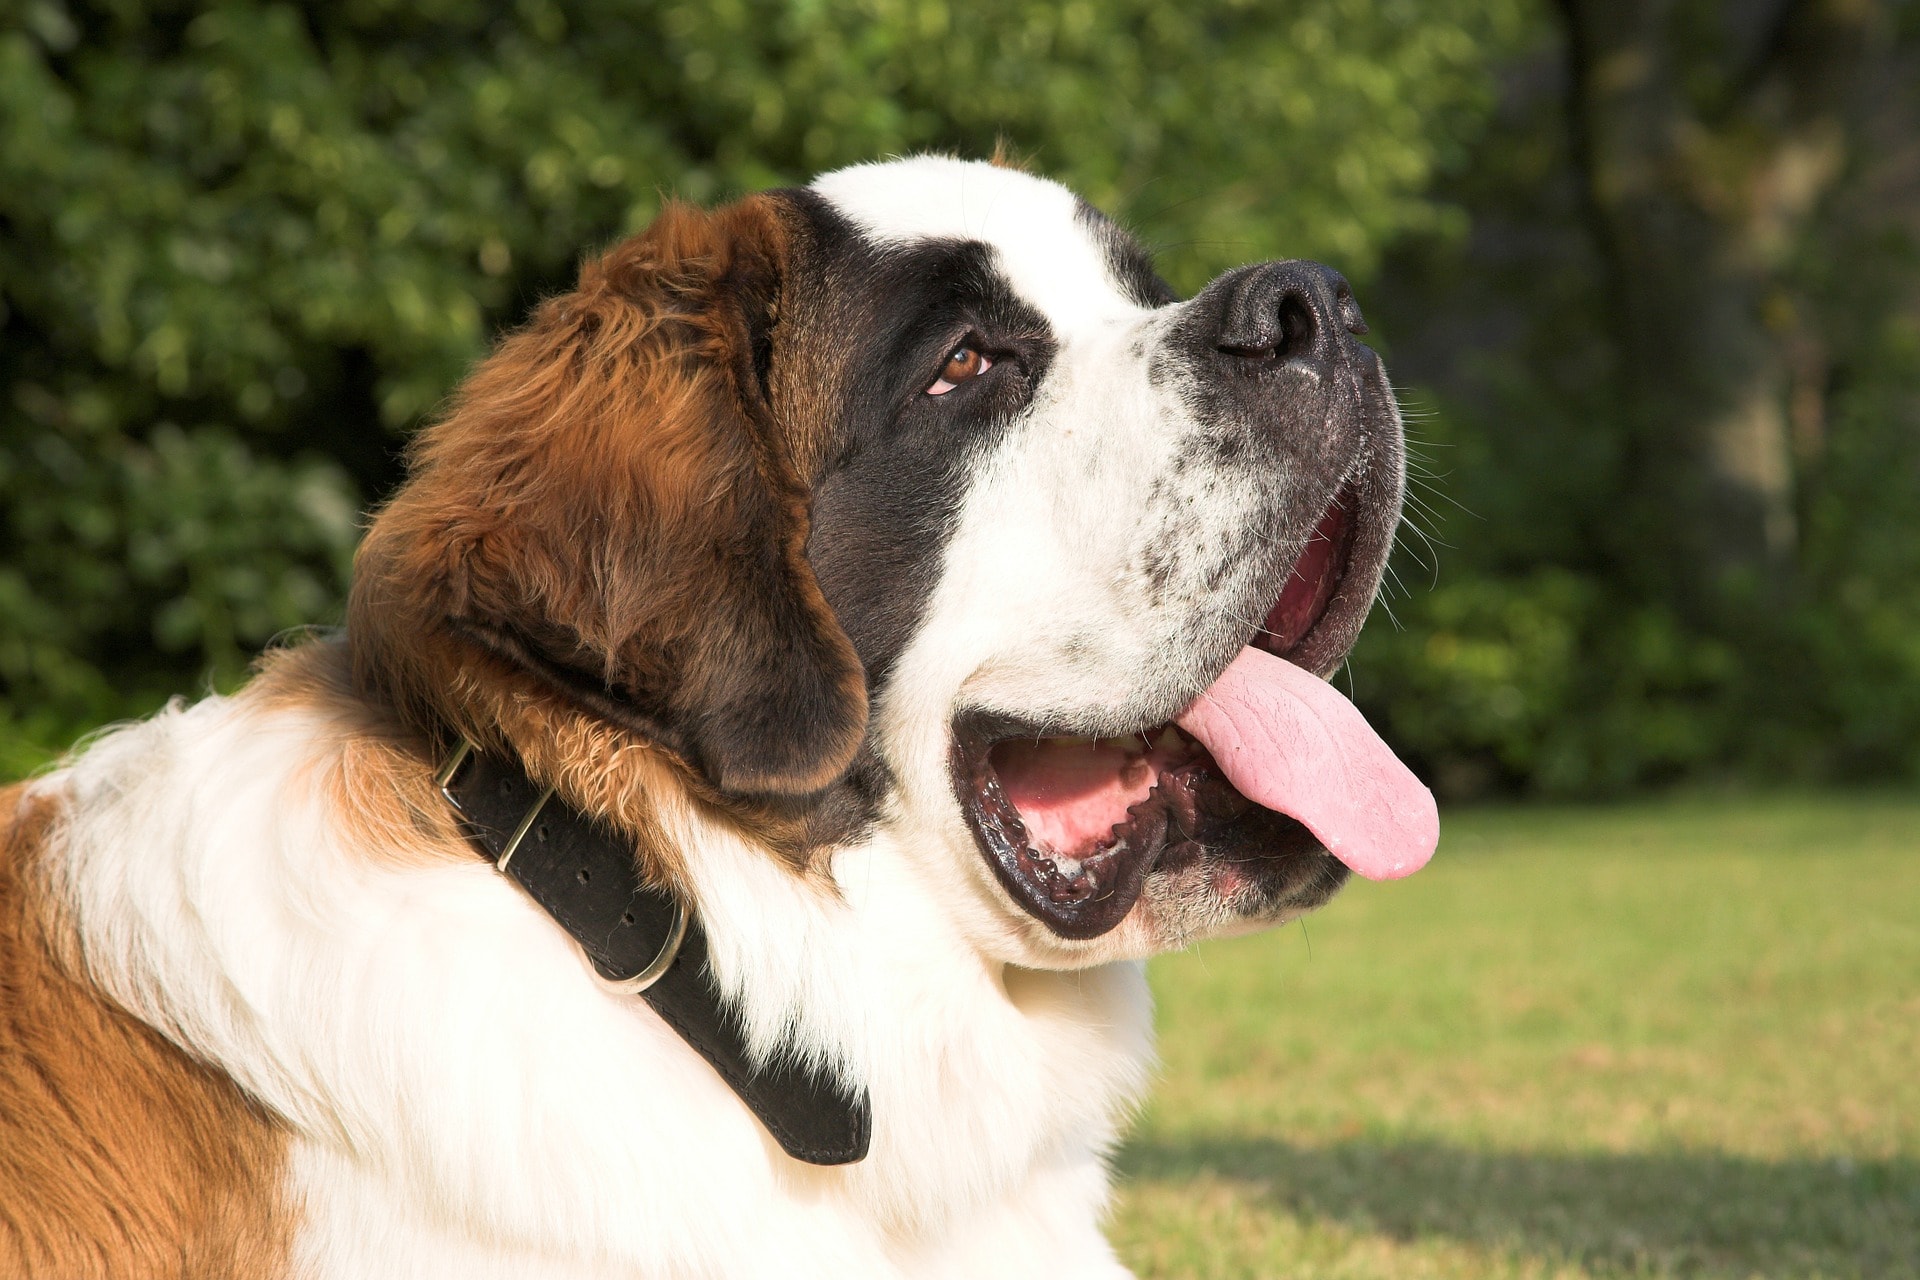 Find Out Why Is The Saint Bernard Dog Also Called The Gentle Giant